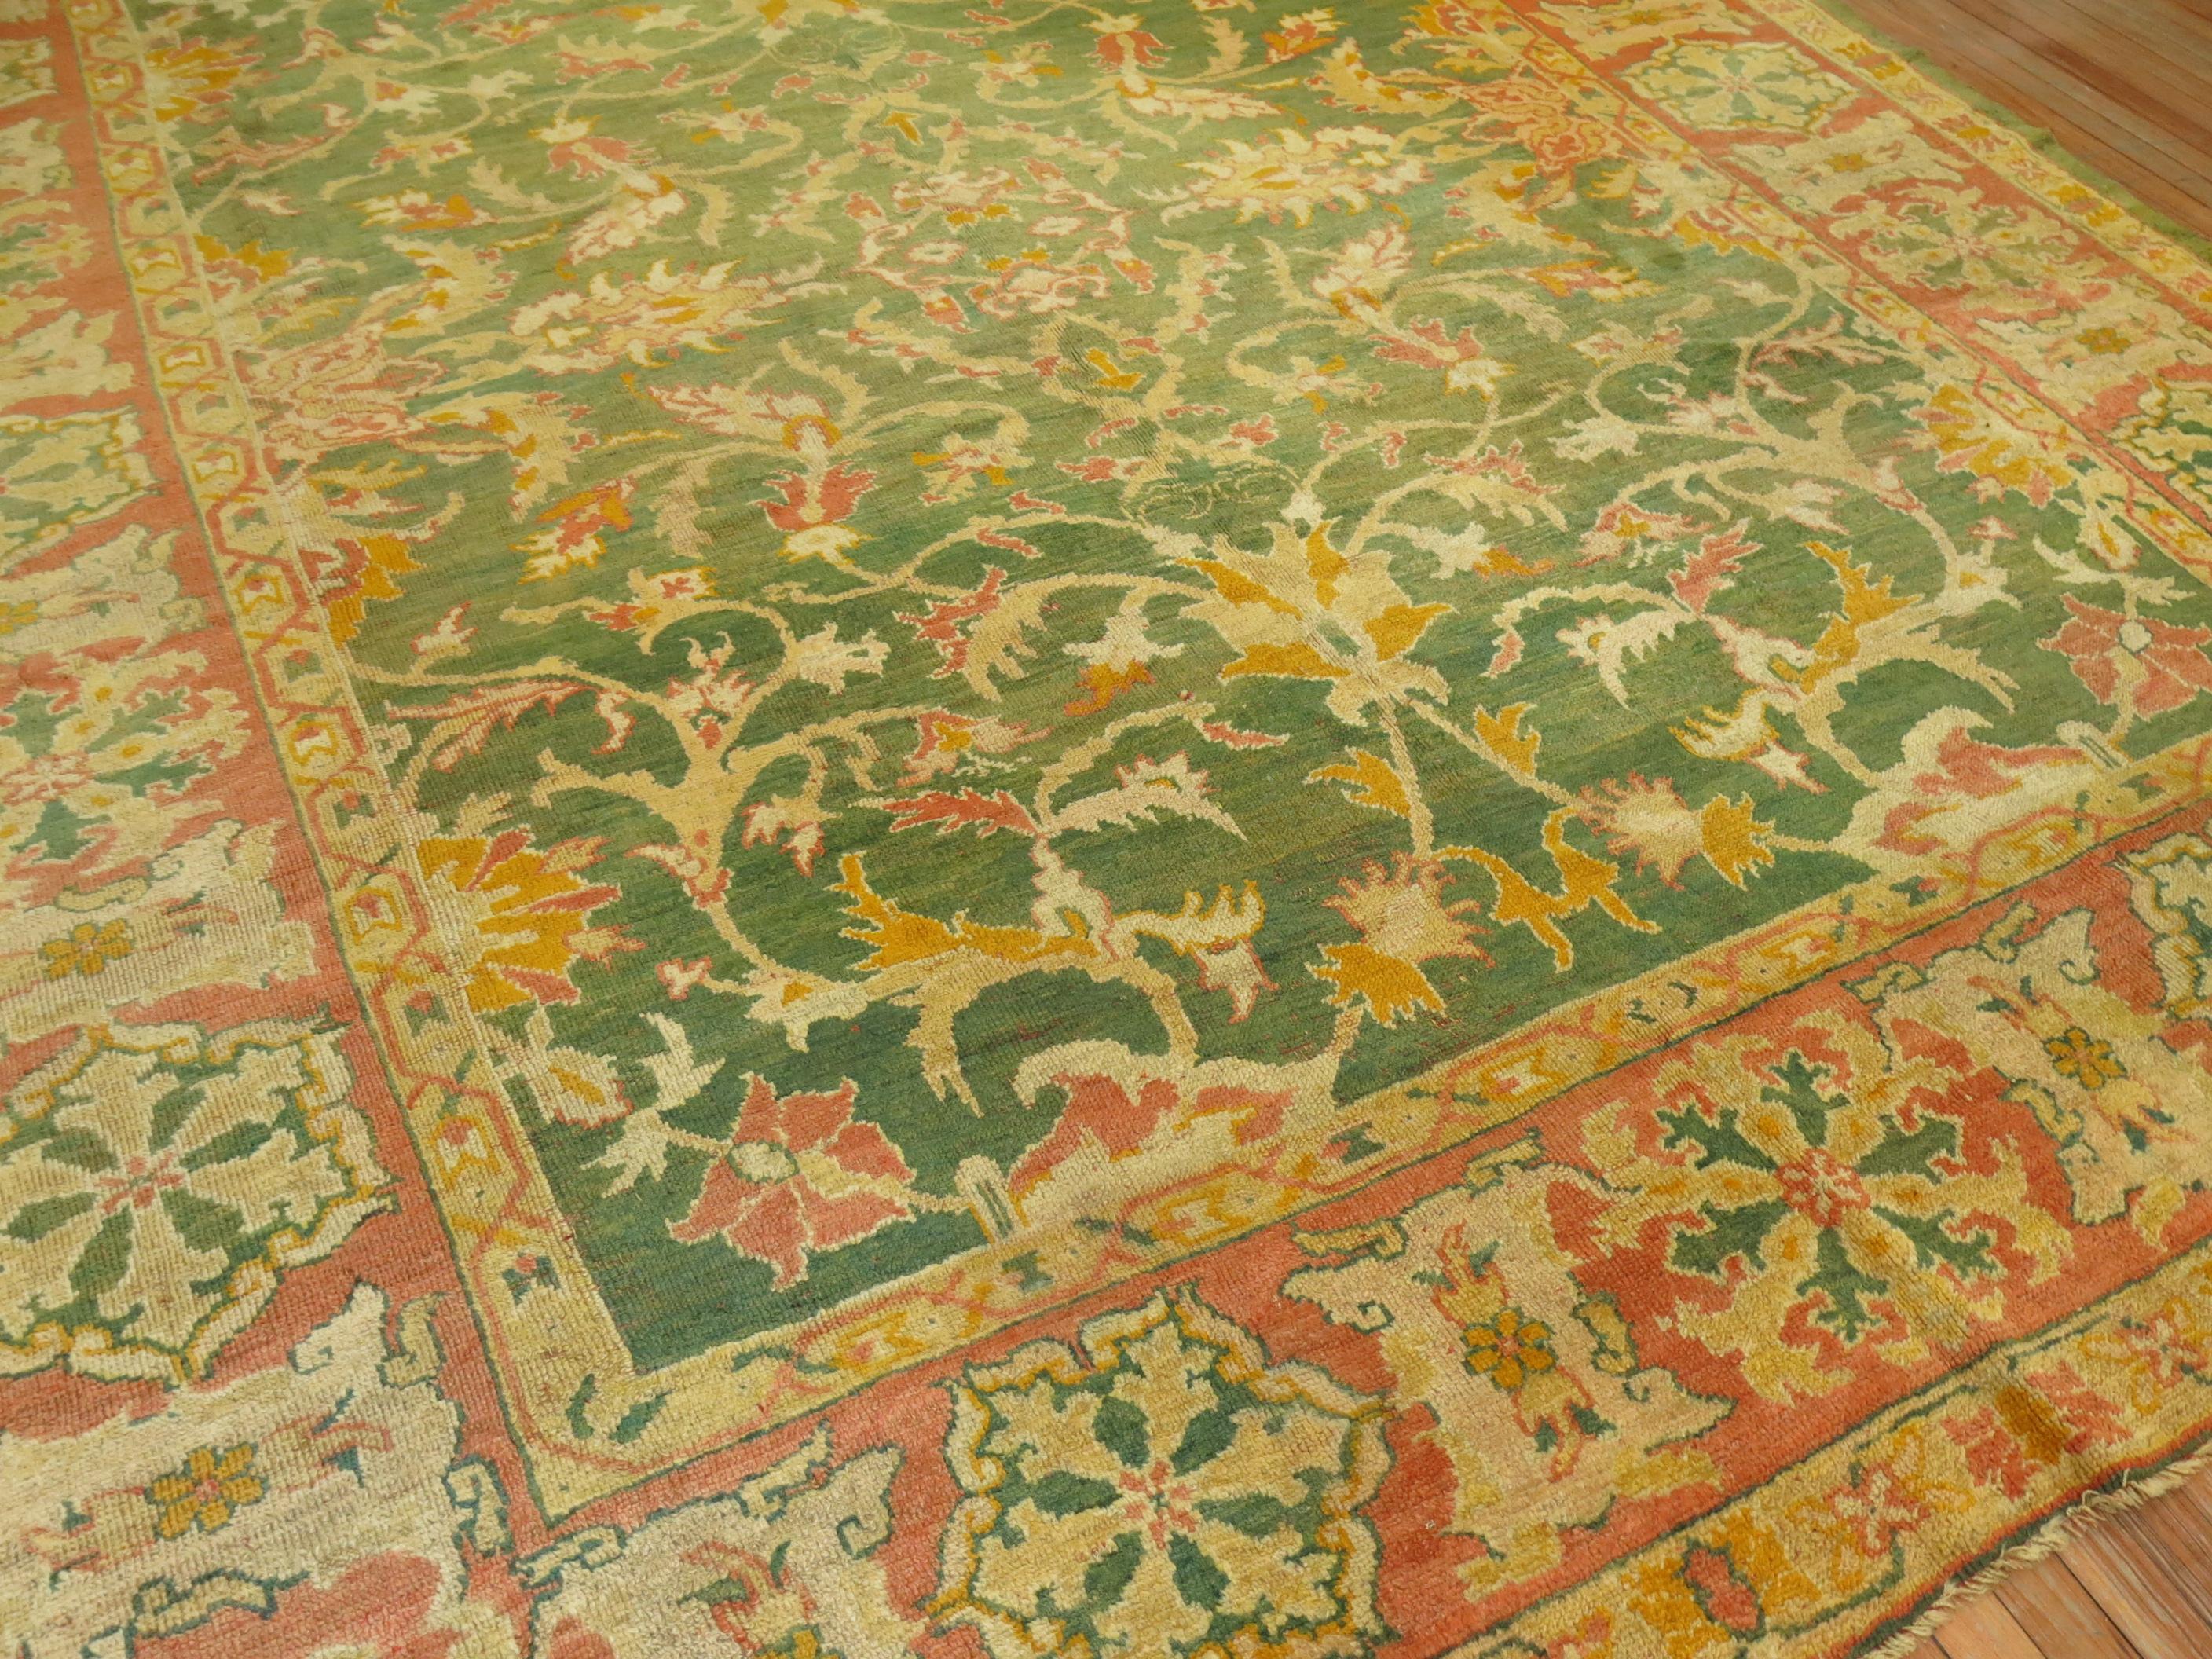 Phenomenal room size antique Oushak rug from the 19th century with a bright green background.